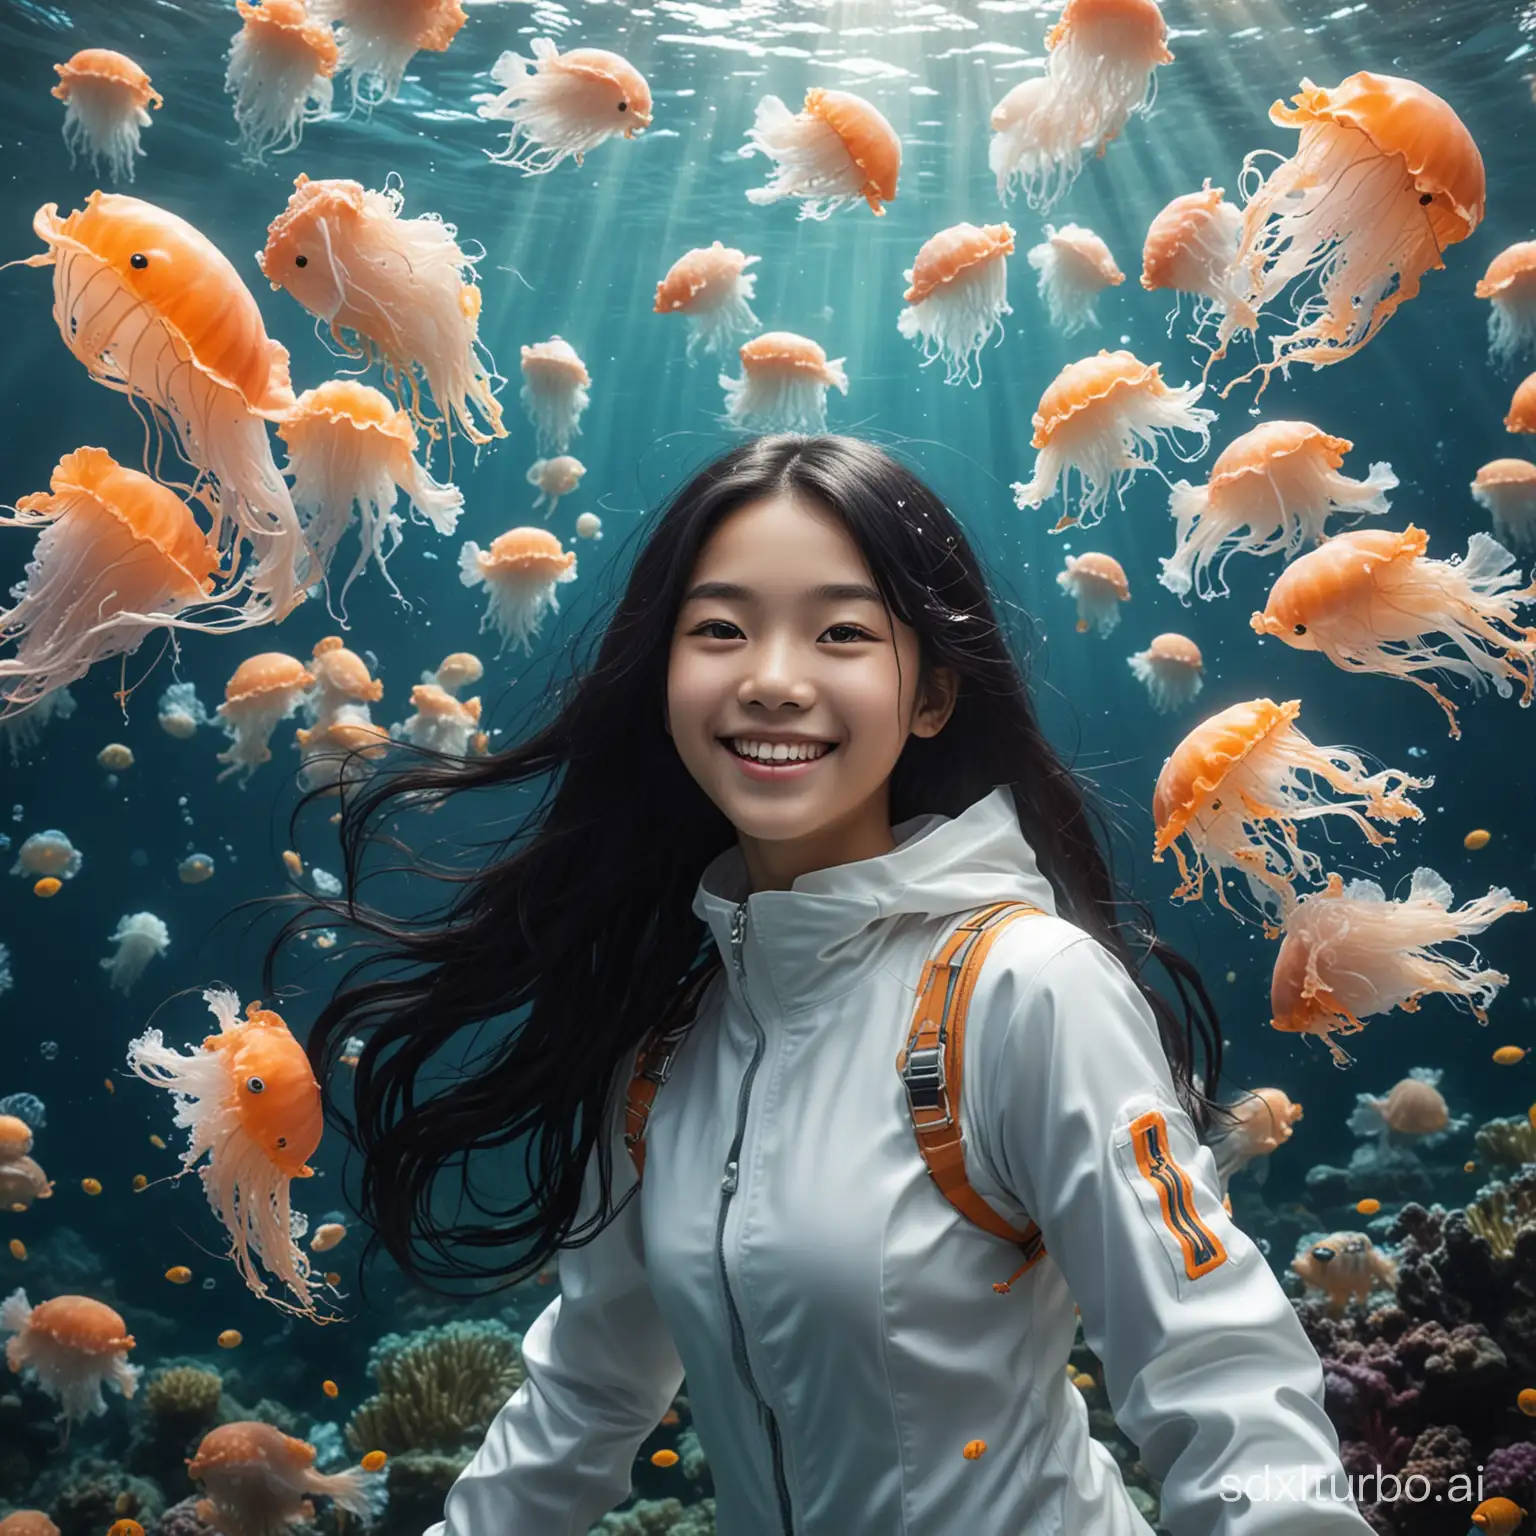 Deep sea underwater, colorful jellyfish, realistic coral reefs, smiling Chinese girl with long black hair, wearing a full set of white diving suits, school of fish,